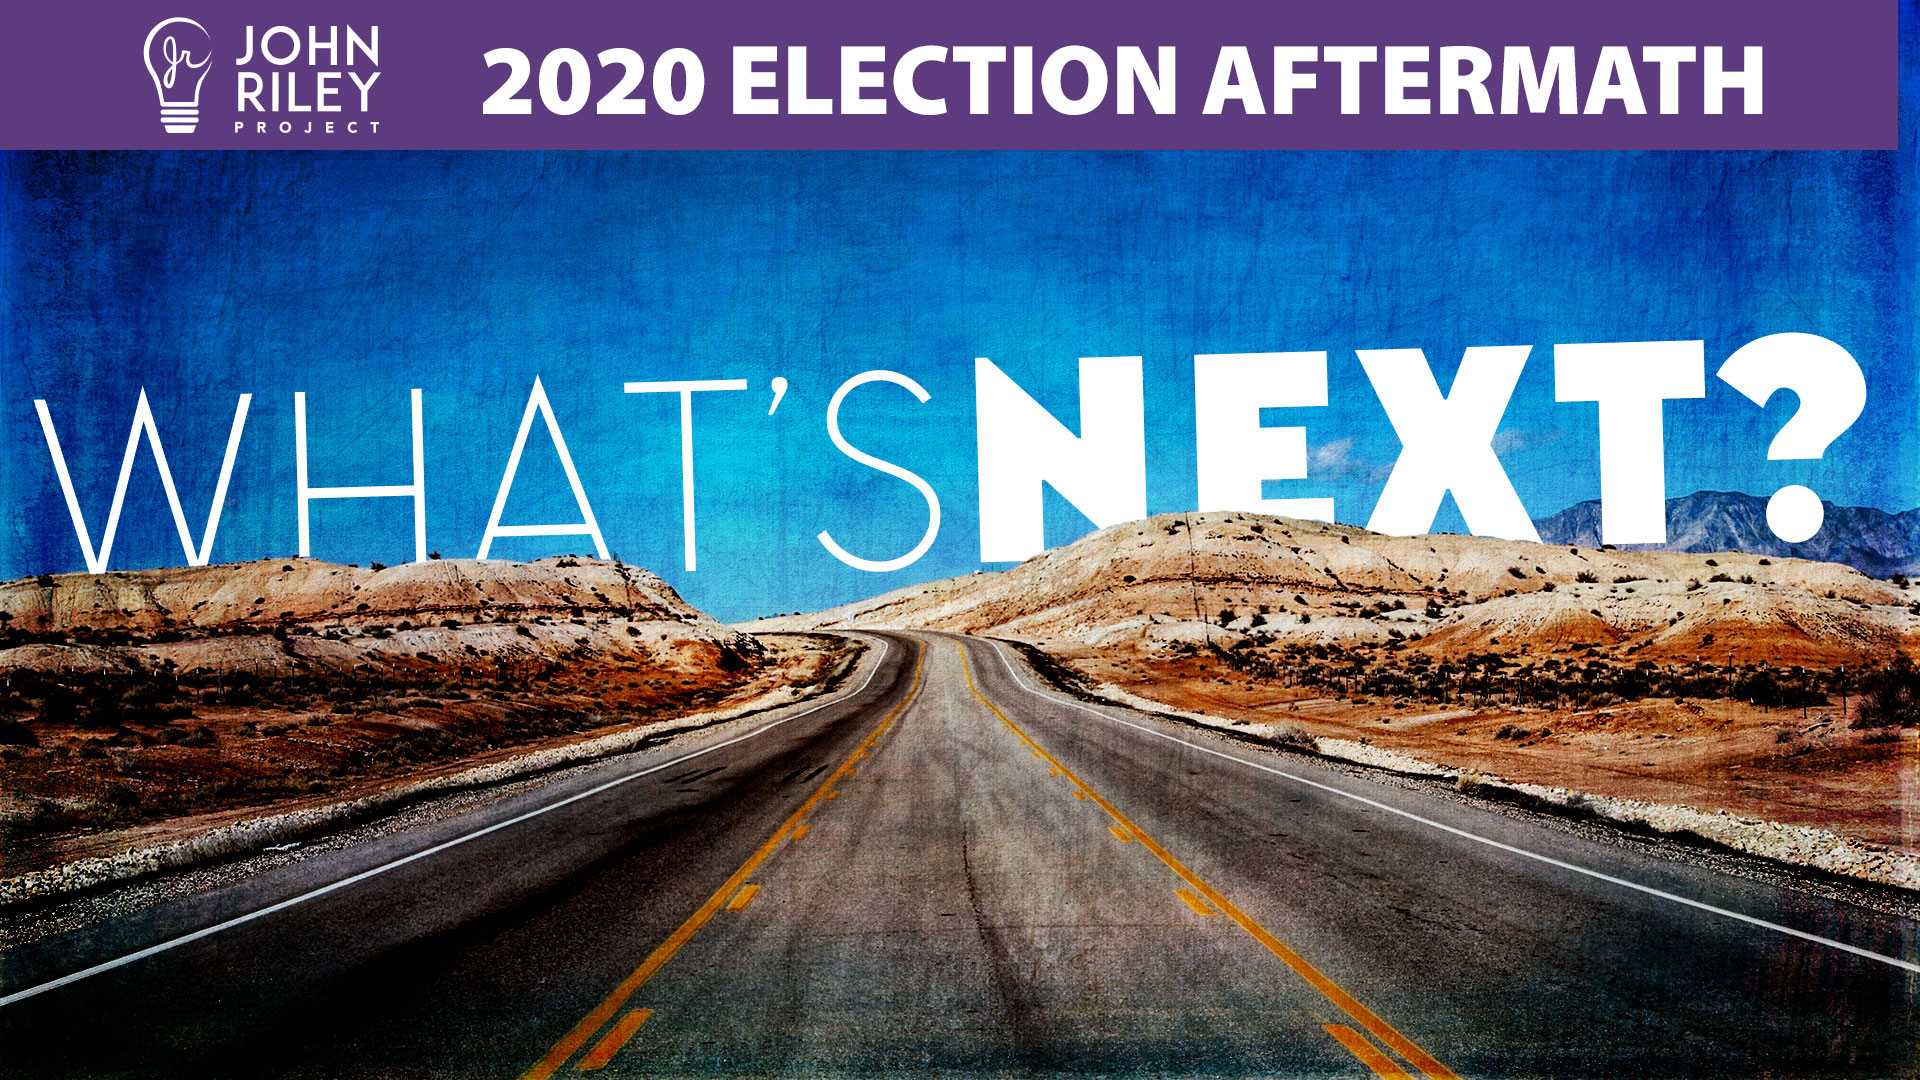 2020 election aftermath, what's next, john riley project, jrp0186